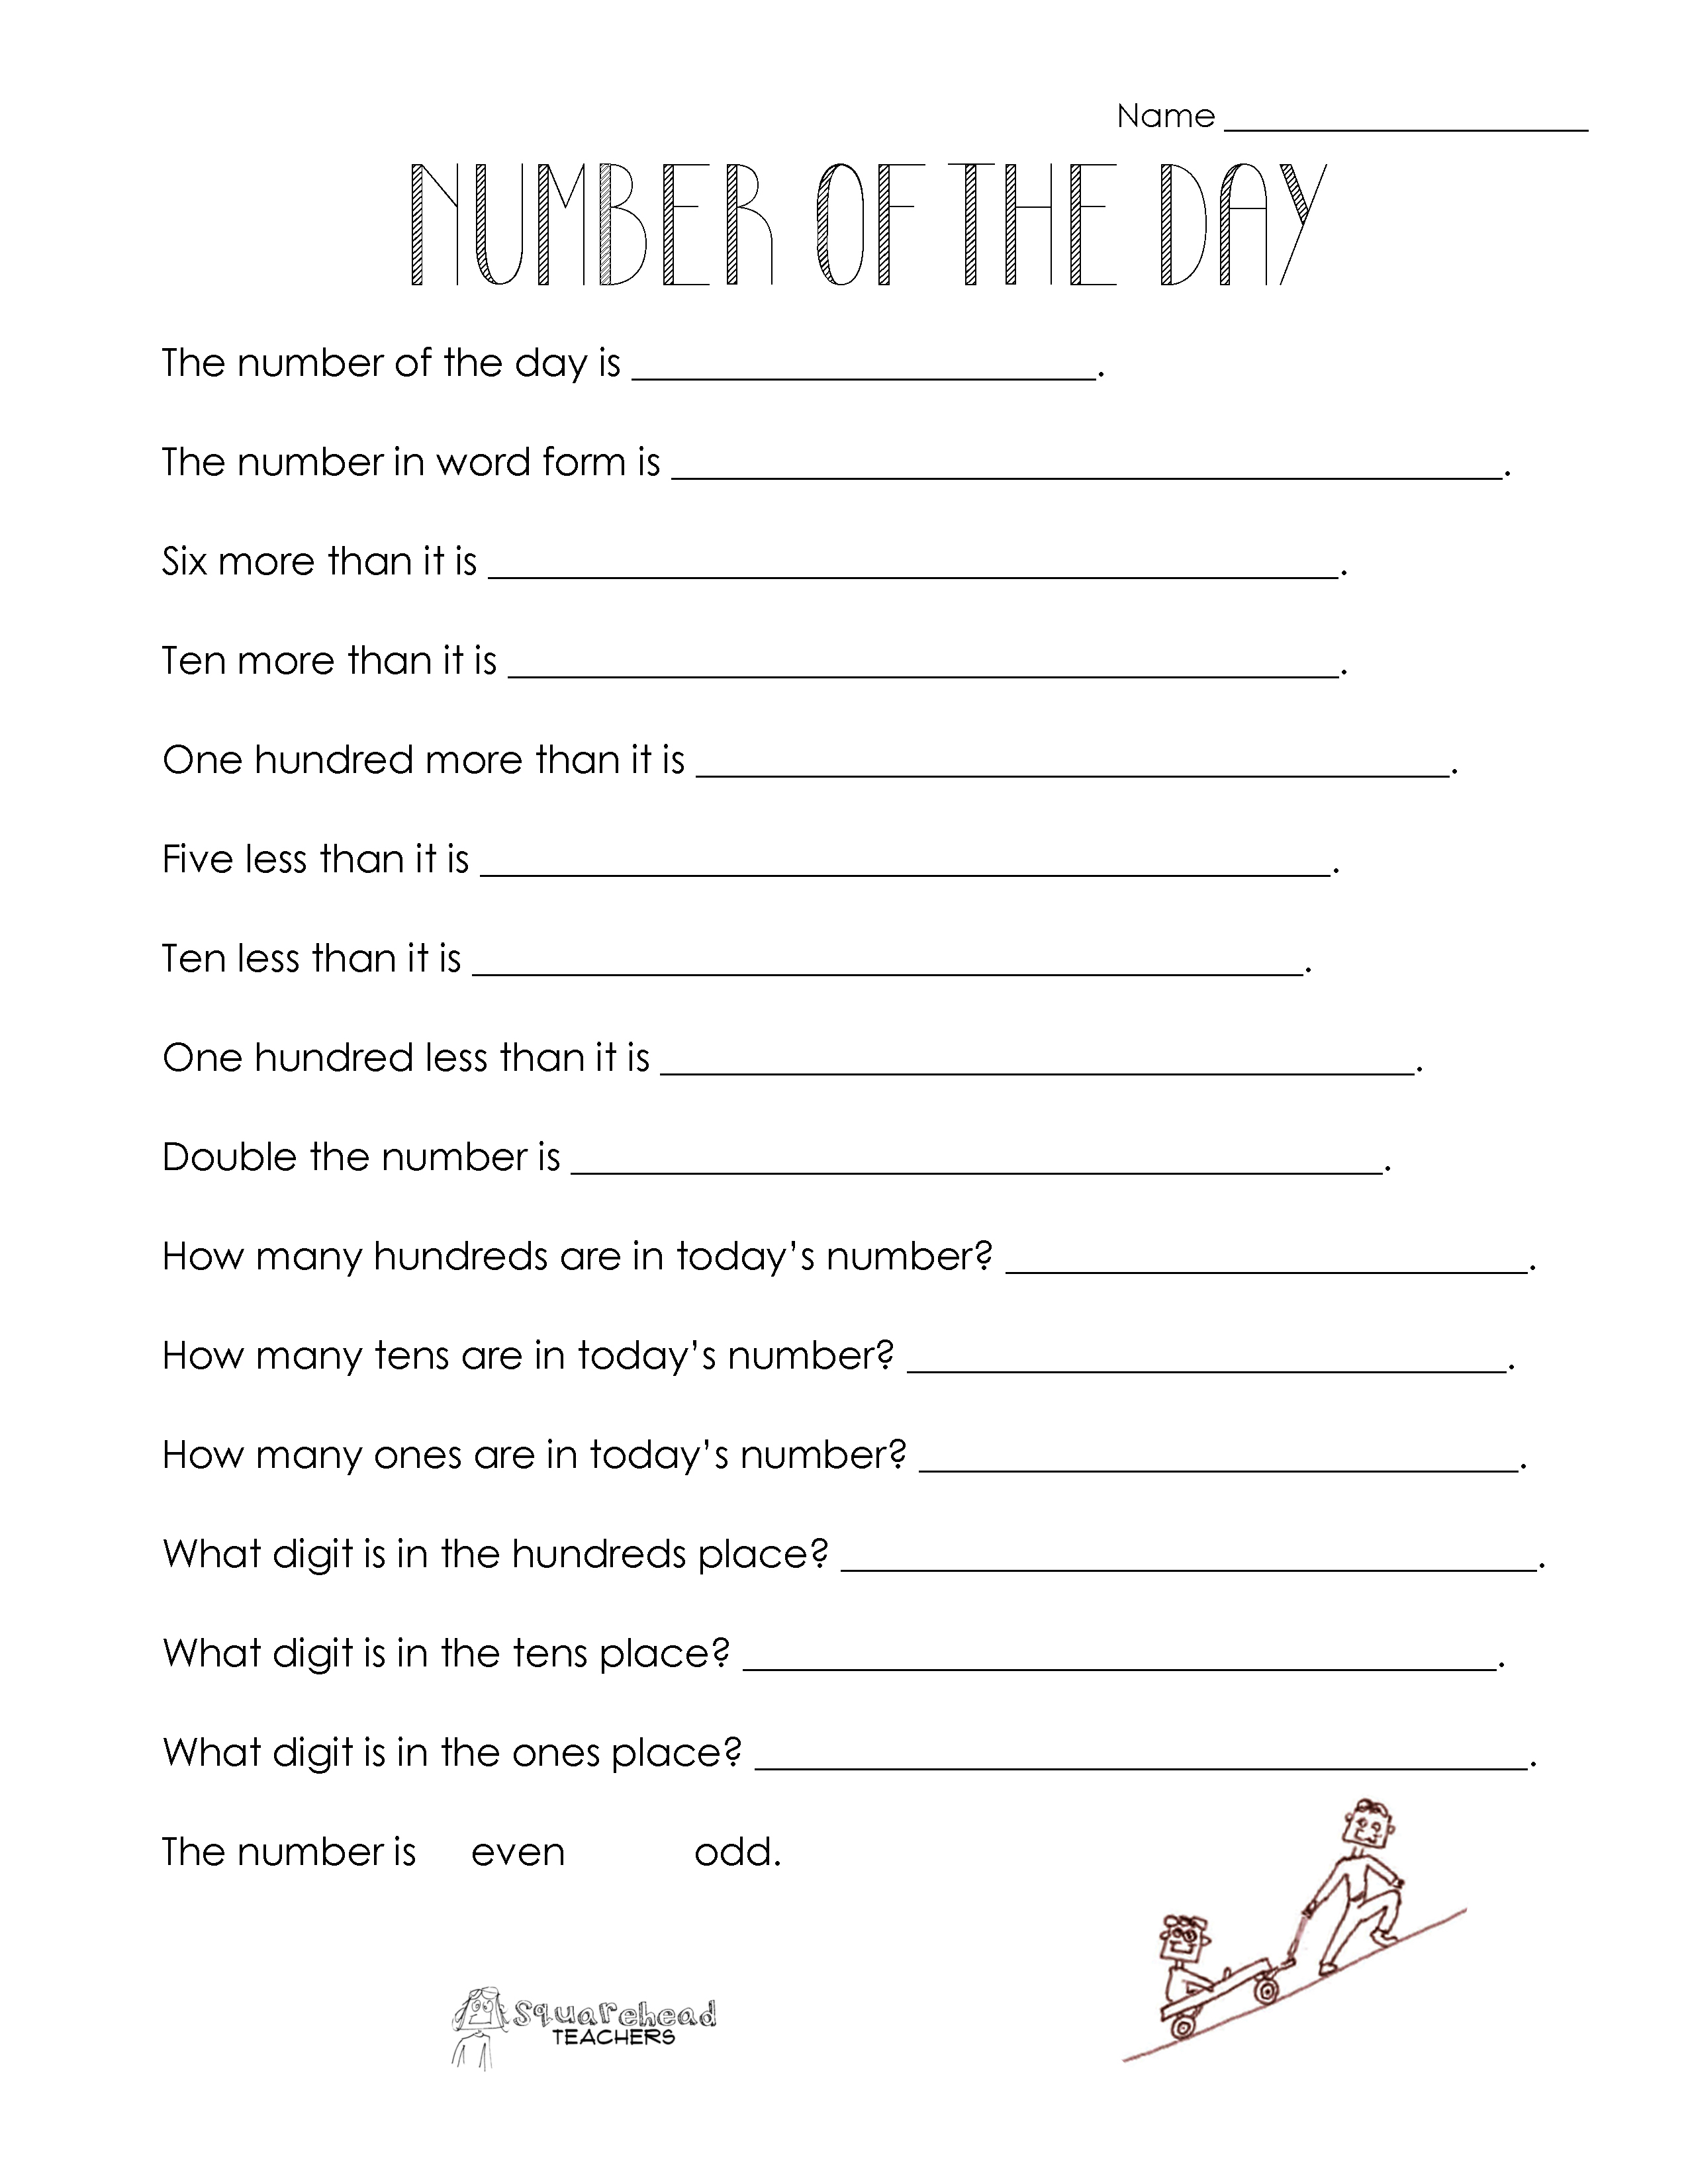 Number Of The Day (Worksheet Collection) | Squarehead Teachers - Free Printable Number Of The Day Worksheets